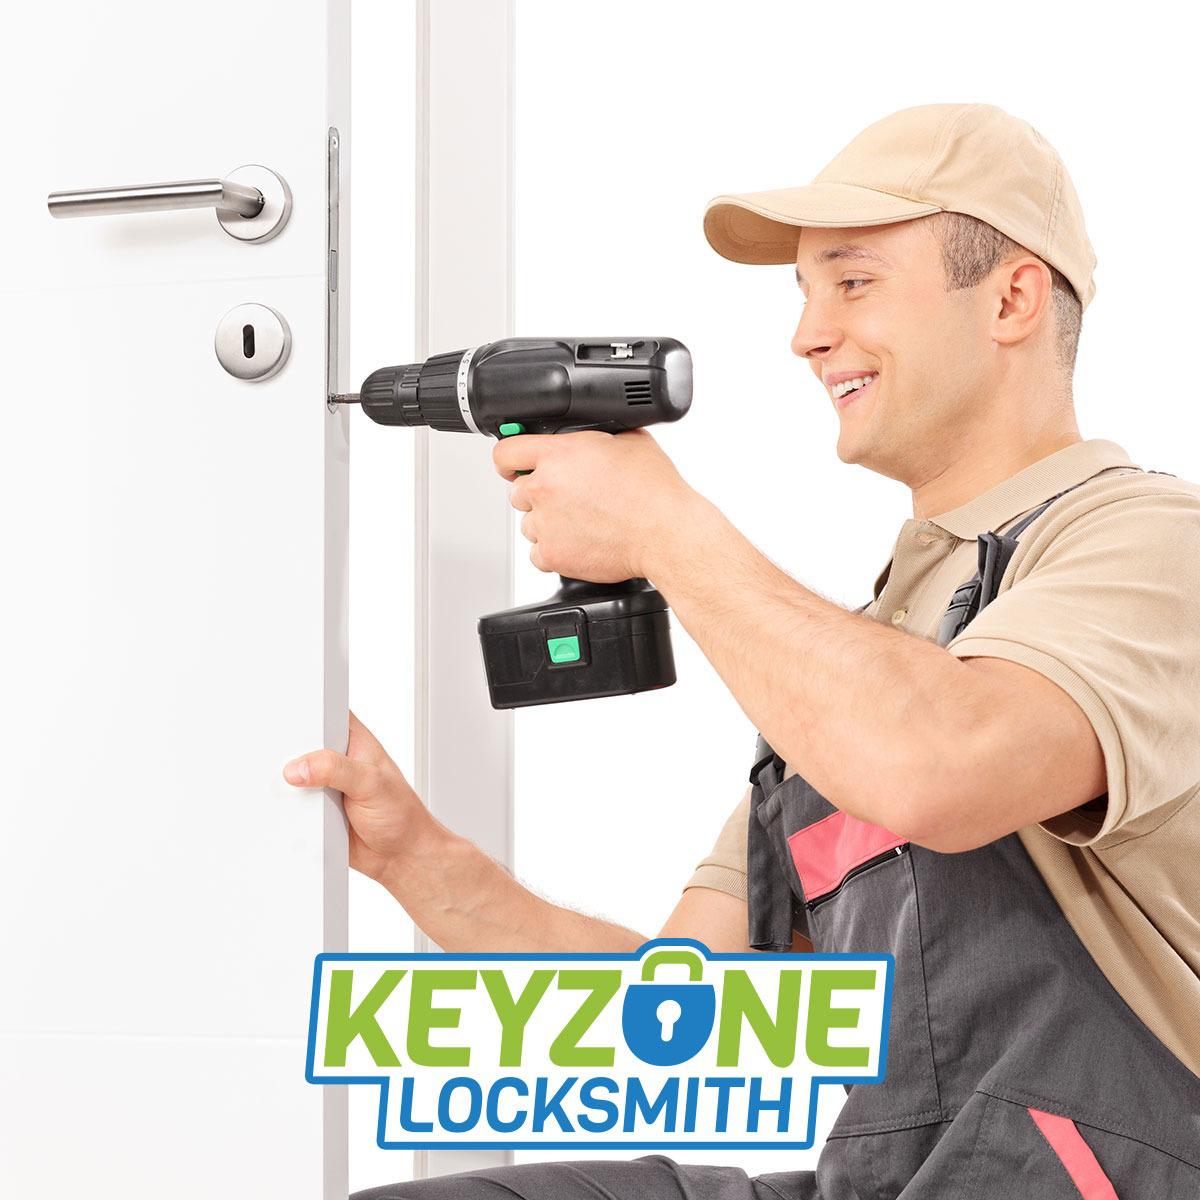 Commercial locksmith

Our commercial locksmith service offers a wide range of security solutions to help business owners sure up their properties